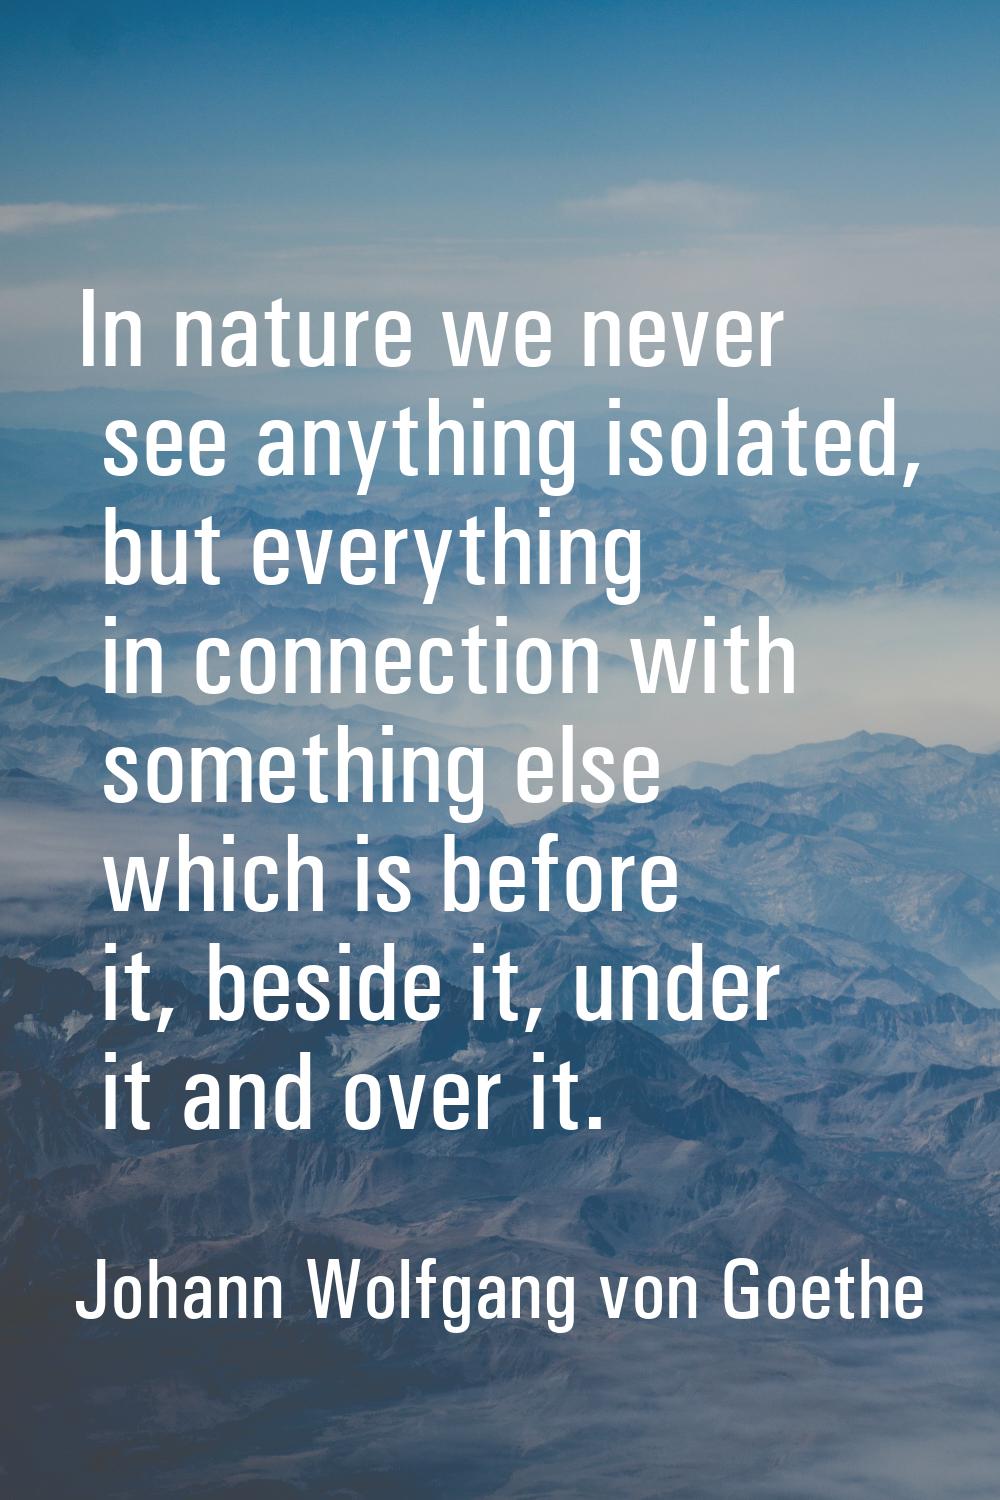 In nature we never see anything isolated, but everything in connection with something else which is